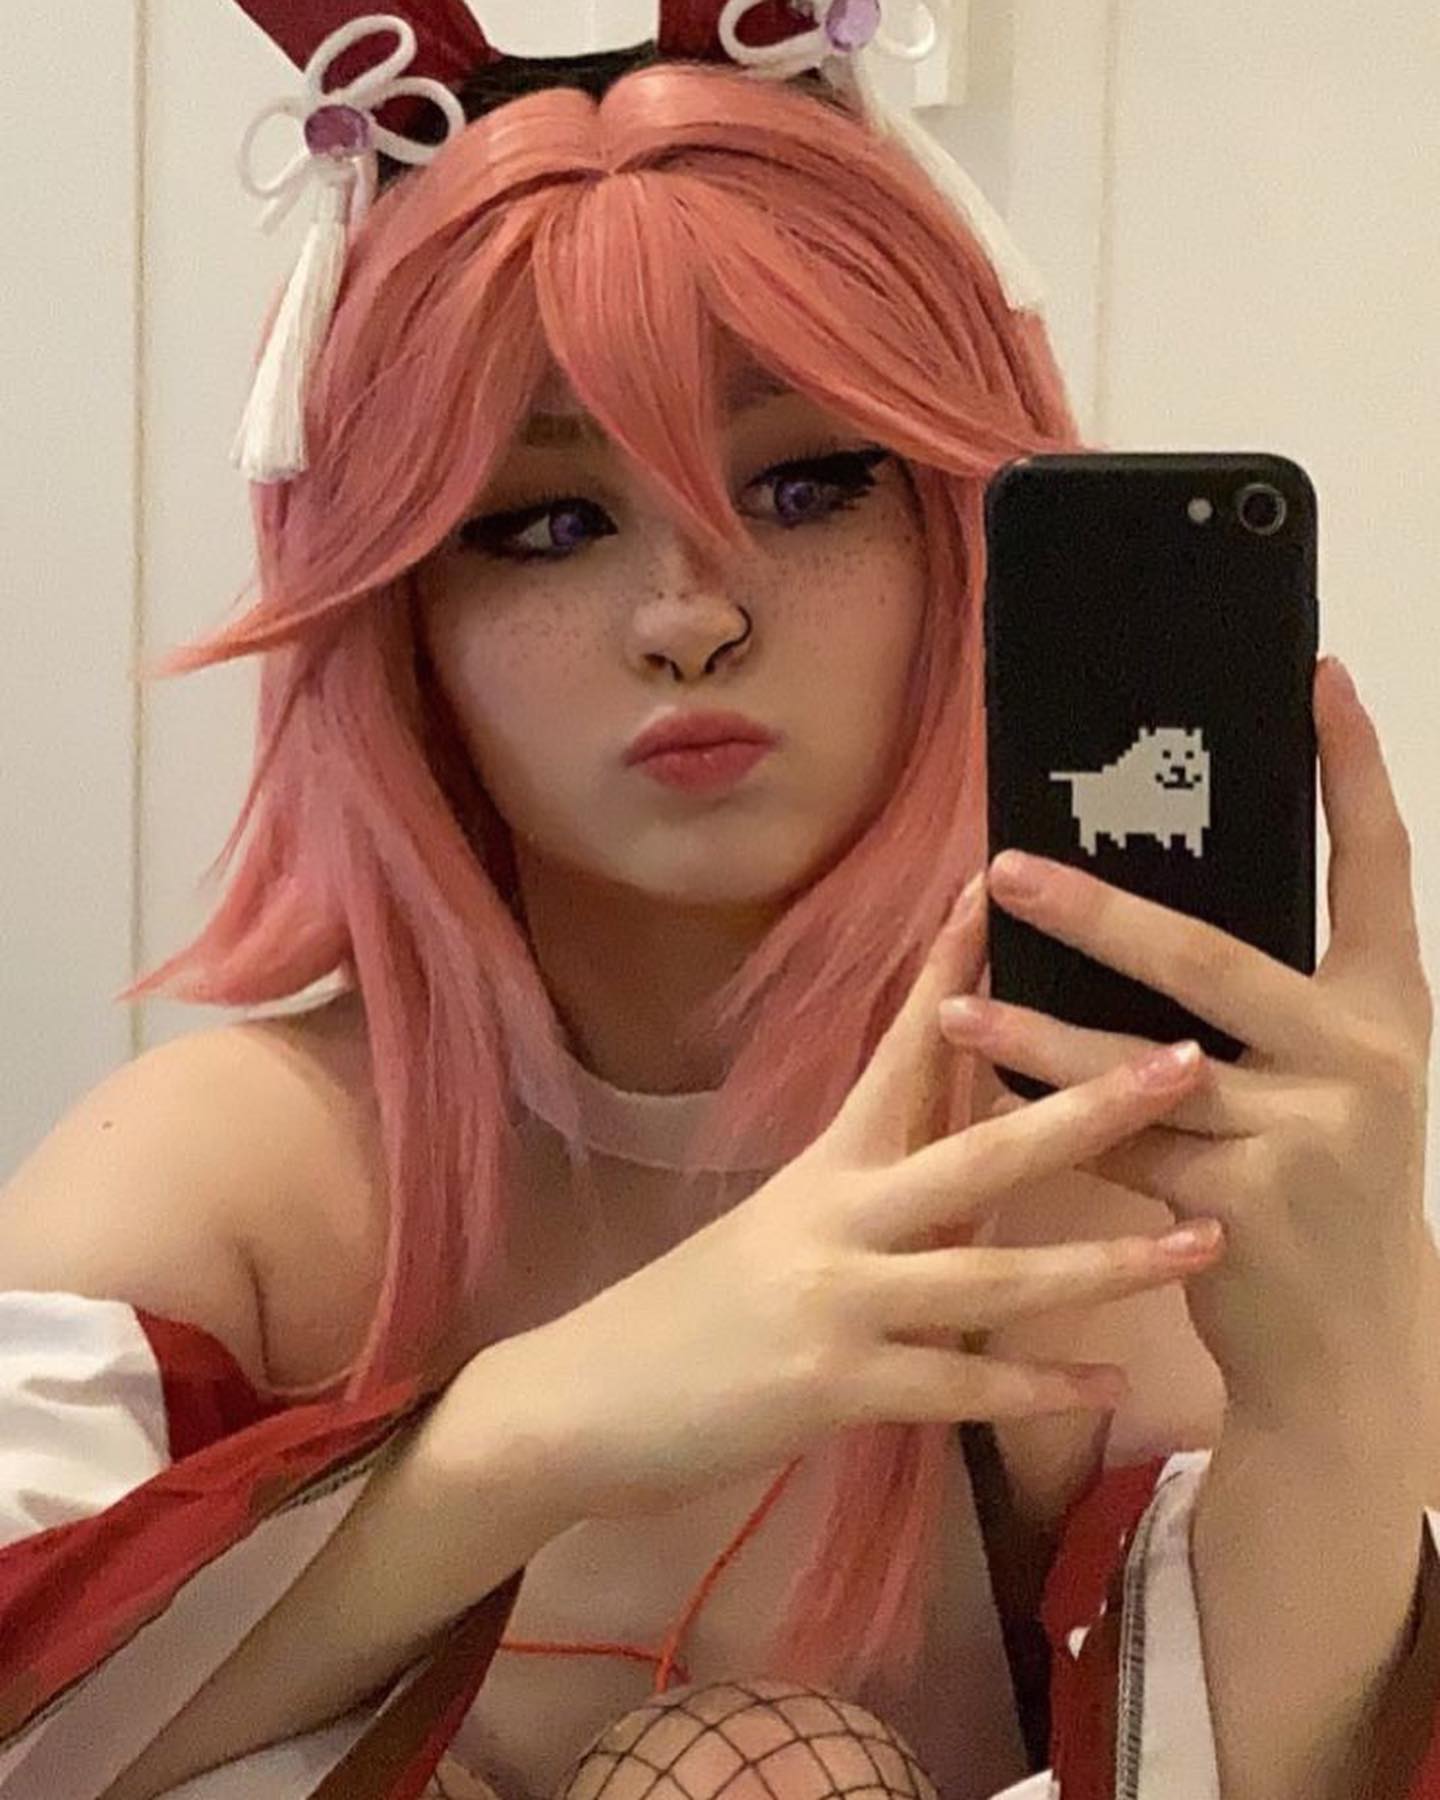 bunny yae miko 🌸💖
-
are you still playing genshin impact? i havent touched that game in like 3 years 😭
cant wait to see yall at lbm saturday !! ill be there as mercy from overwatch ! 🌸✨
-
tags!
-
#cosplay #cosplayer #cosplaygirl #cosplaying #yaemiko #genshinimpact #genshin #genshincosplay #genshinimpactcosplay #yaemikocosplay #yaemikoedit #genshinimpactedit #gaming #gamecosplay #viral